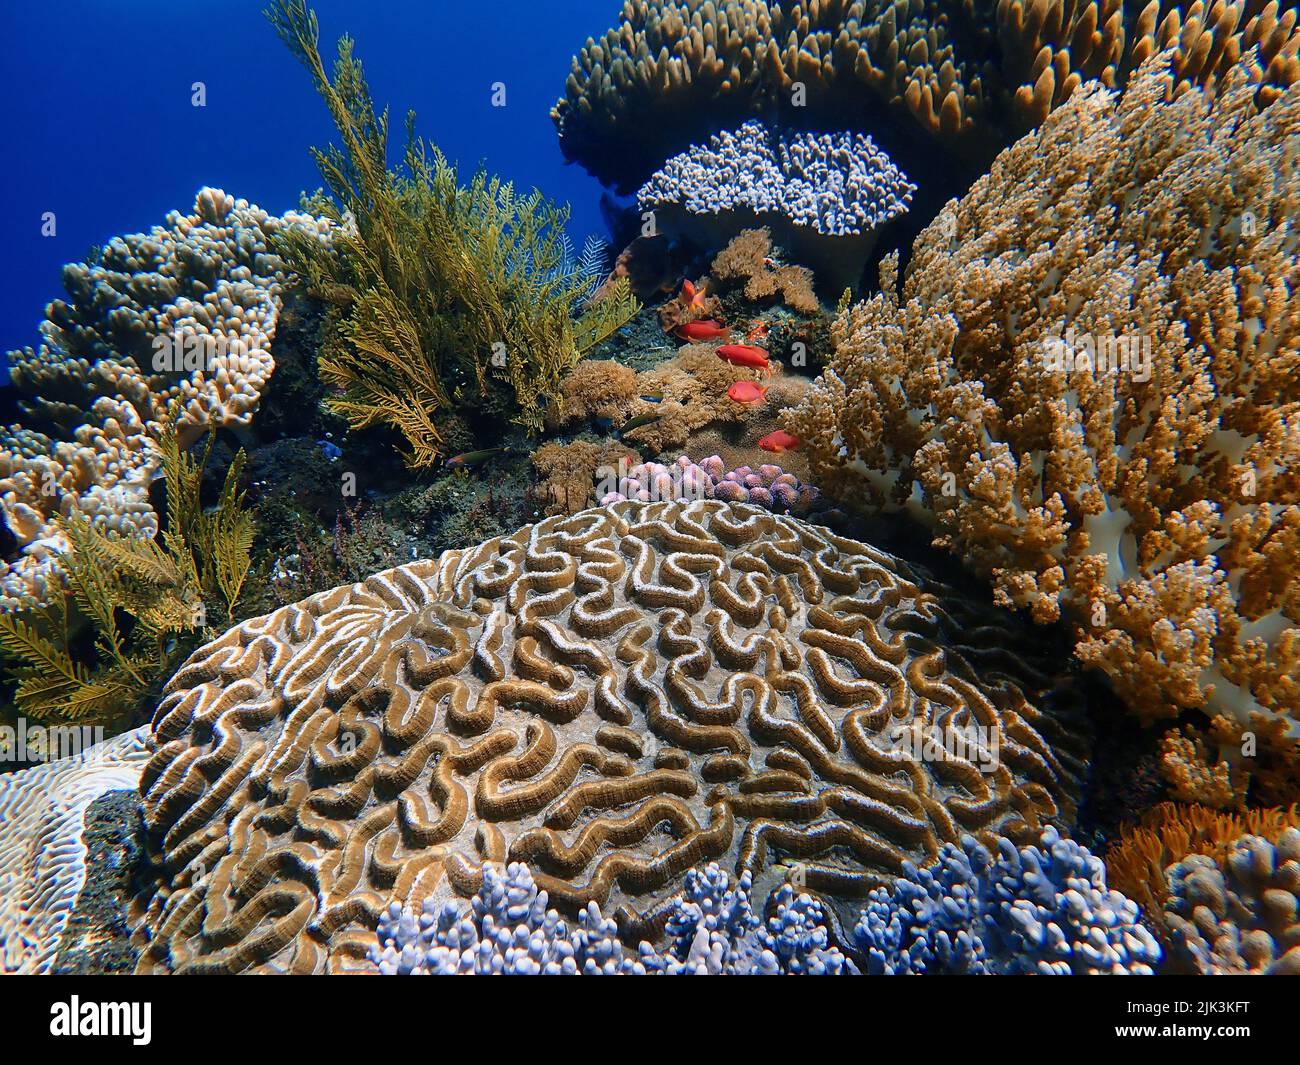 Indonesia Sumbawa - Colorful coral reef with tropical fish Stock Photo